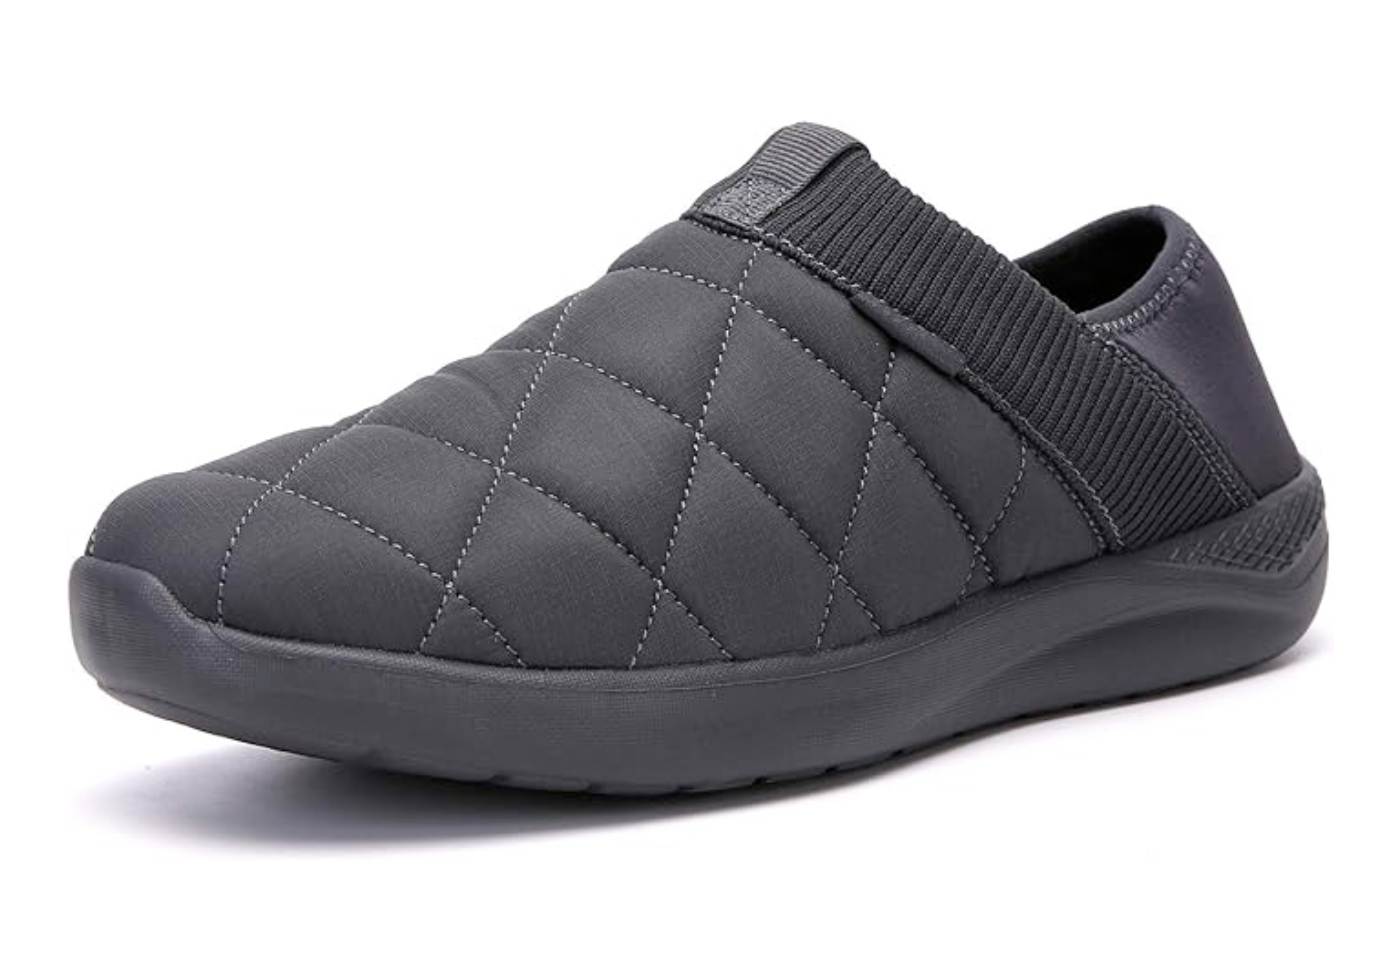 Get Set Globe Top 10 Best Comfy Slippers Like Shoes - KUBUA Slippers for Men and Womens